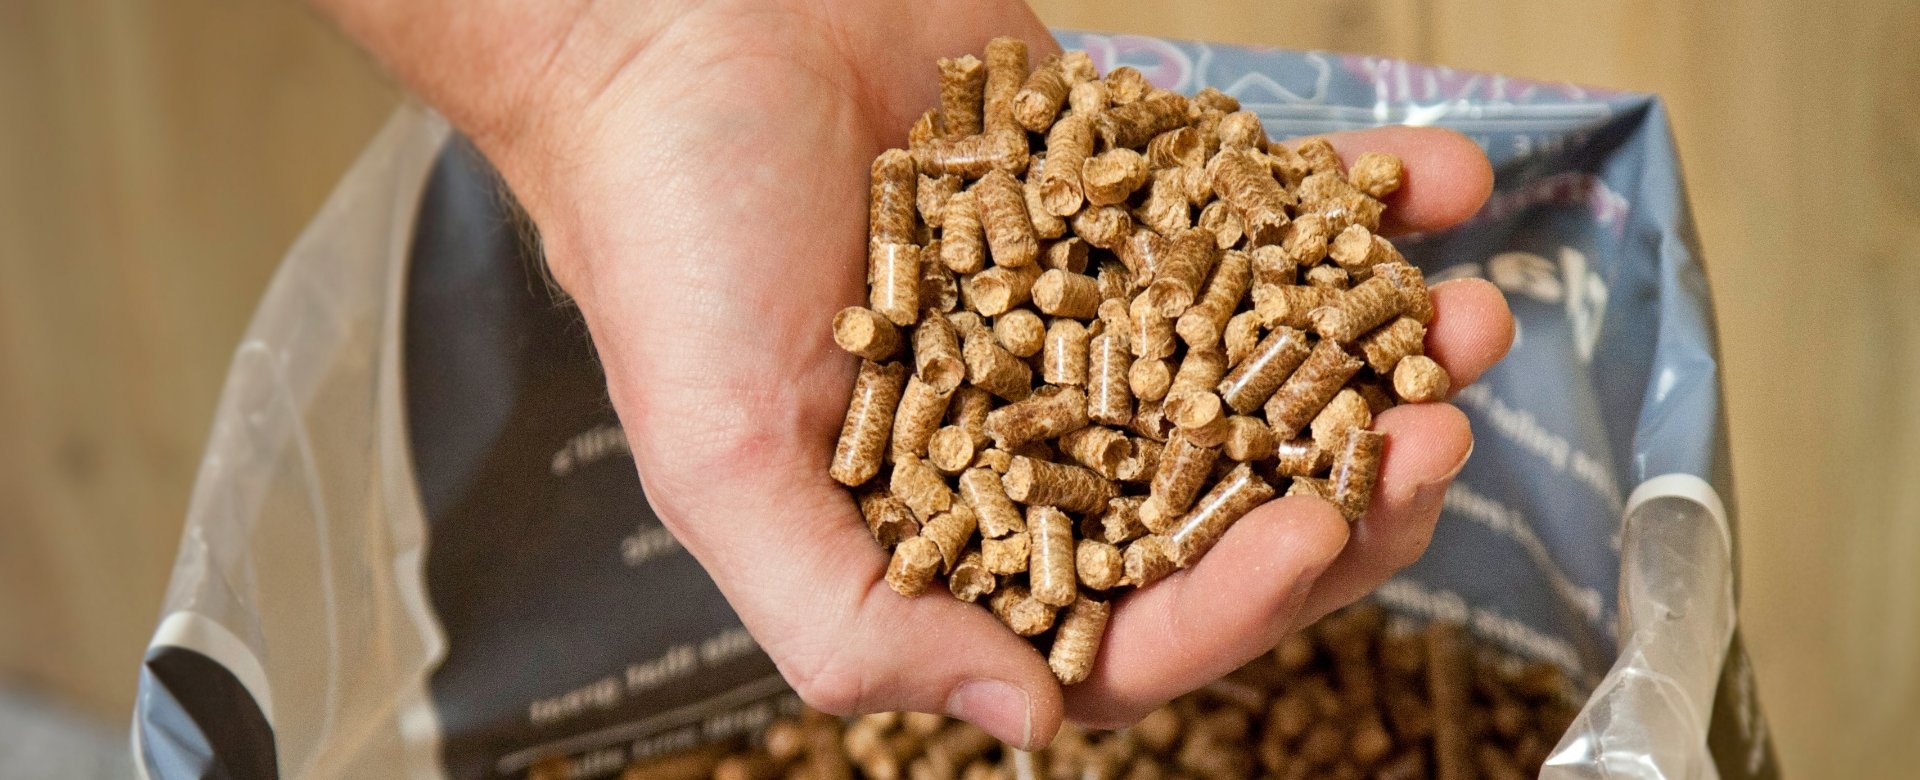 Your Guide to Smoker Pellets